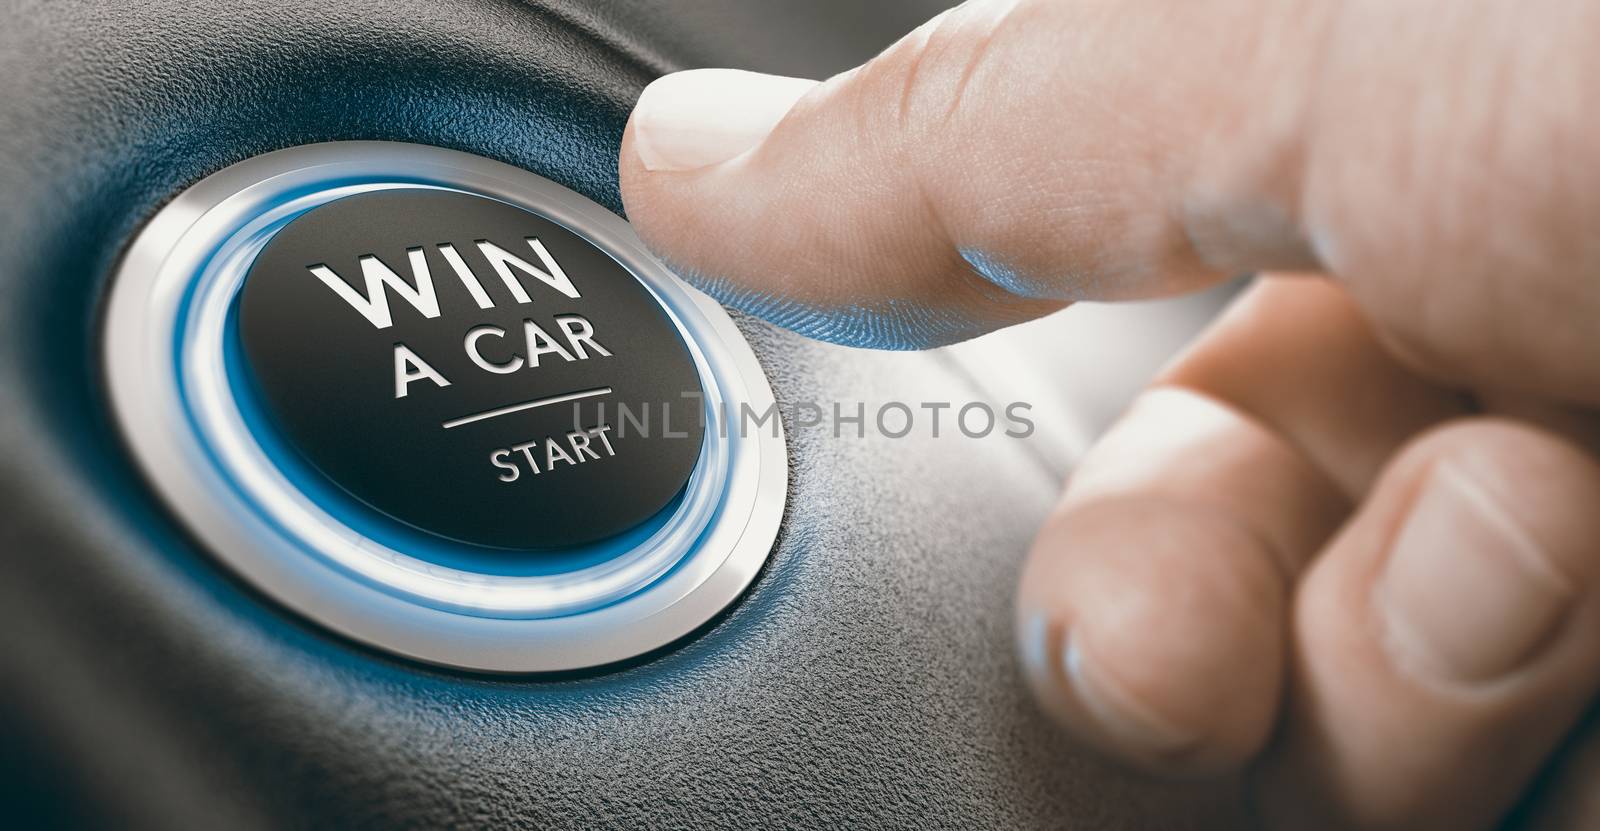 Finger pushing a conceptual Ignition button. Win a Car Contest Concept. Composite image between a hand photography and a 3D background.